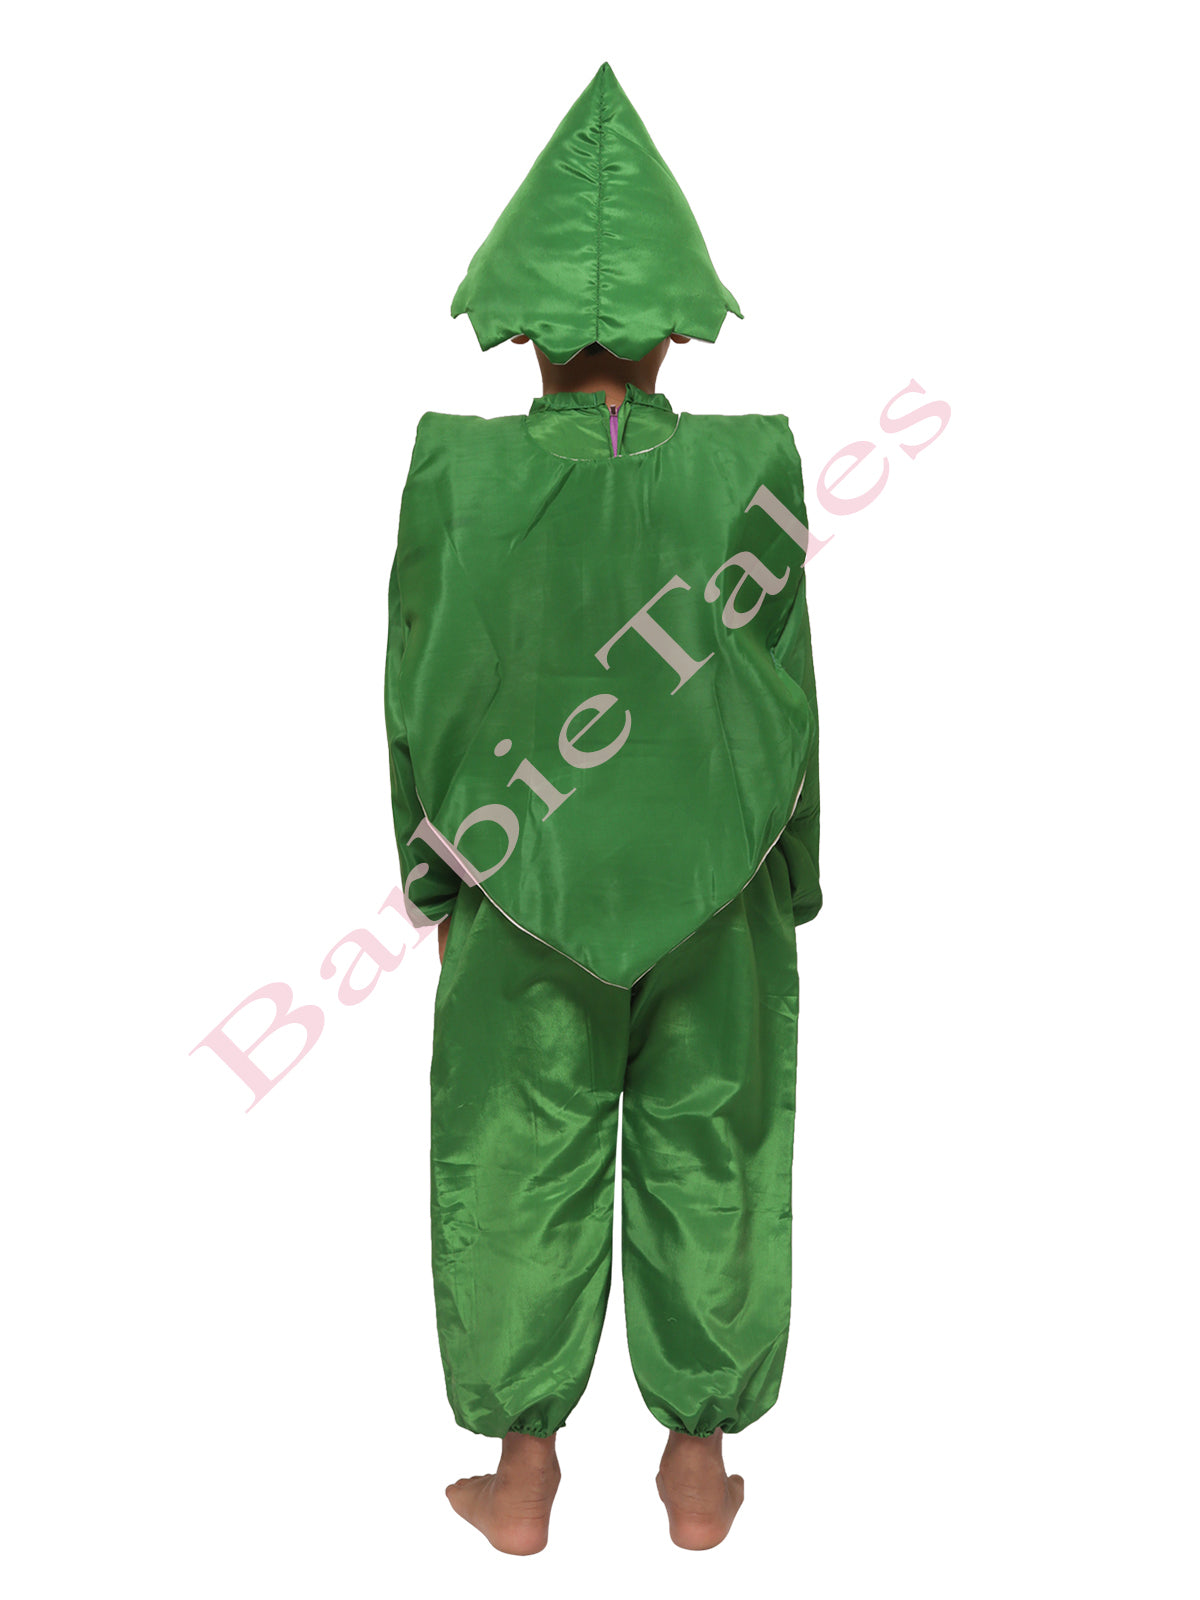 Fancy Dresses Grapes Kids Costume – 5594 – Fancy Dress Store in Gaur City,  School Function Costumes at best prices/ Rental